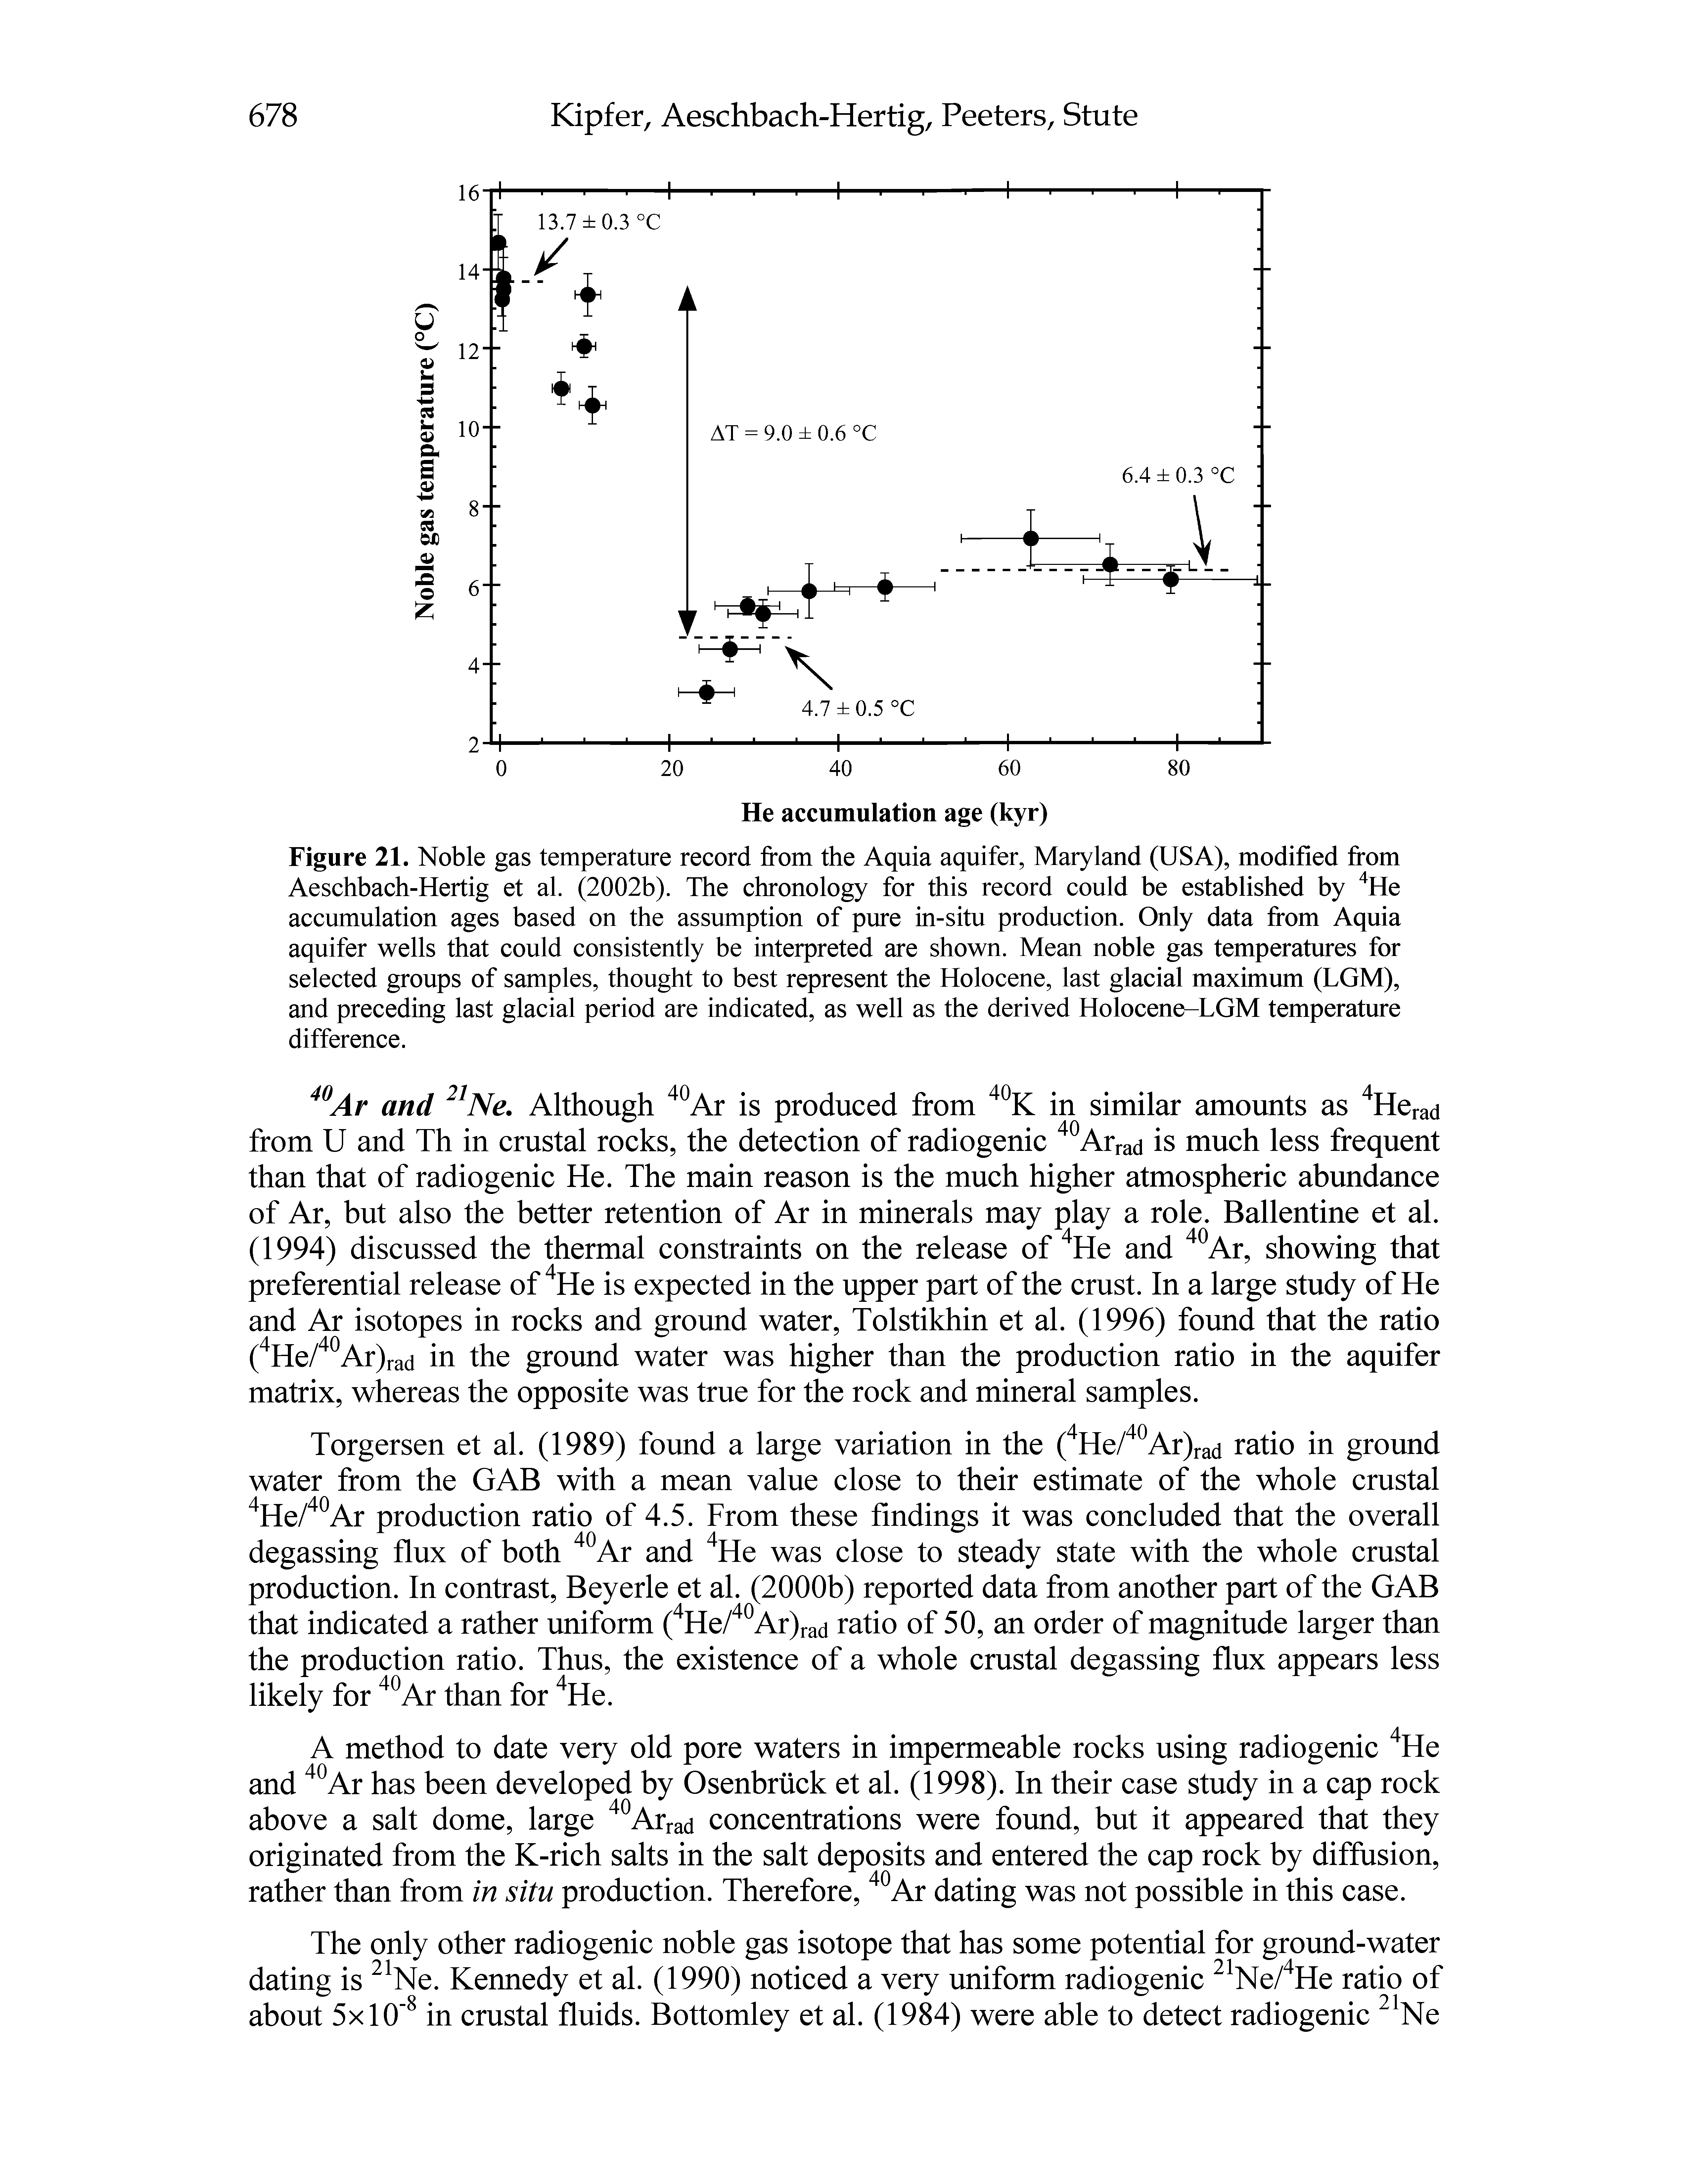 Figure 21. Noble gas temperature record from the Aquia aquifer, Maryland (USA), modified from Aeschbach-Hertig et al. (2002b). The chronology for this record could be established by " He accumulation ages based on the assumption of pure in-situ production. Only data from Aquia aquifer wells that could consistently be interpreted are shown. Mean noble gas temperatures for selected groups of samples, thought to best represent the Holocene, last glacial maximum (LGM), and preceding last glacial period are indicated, as well as the derived Holocene-LGM temperature difference.